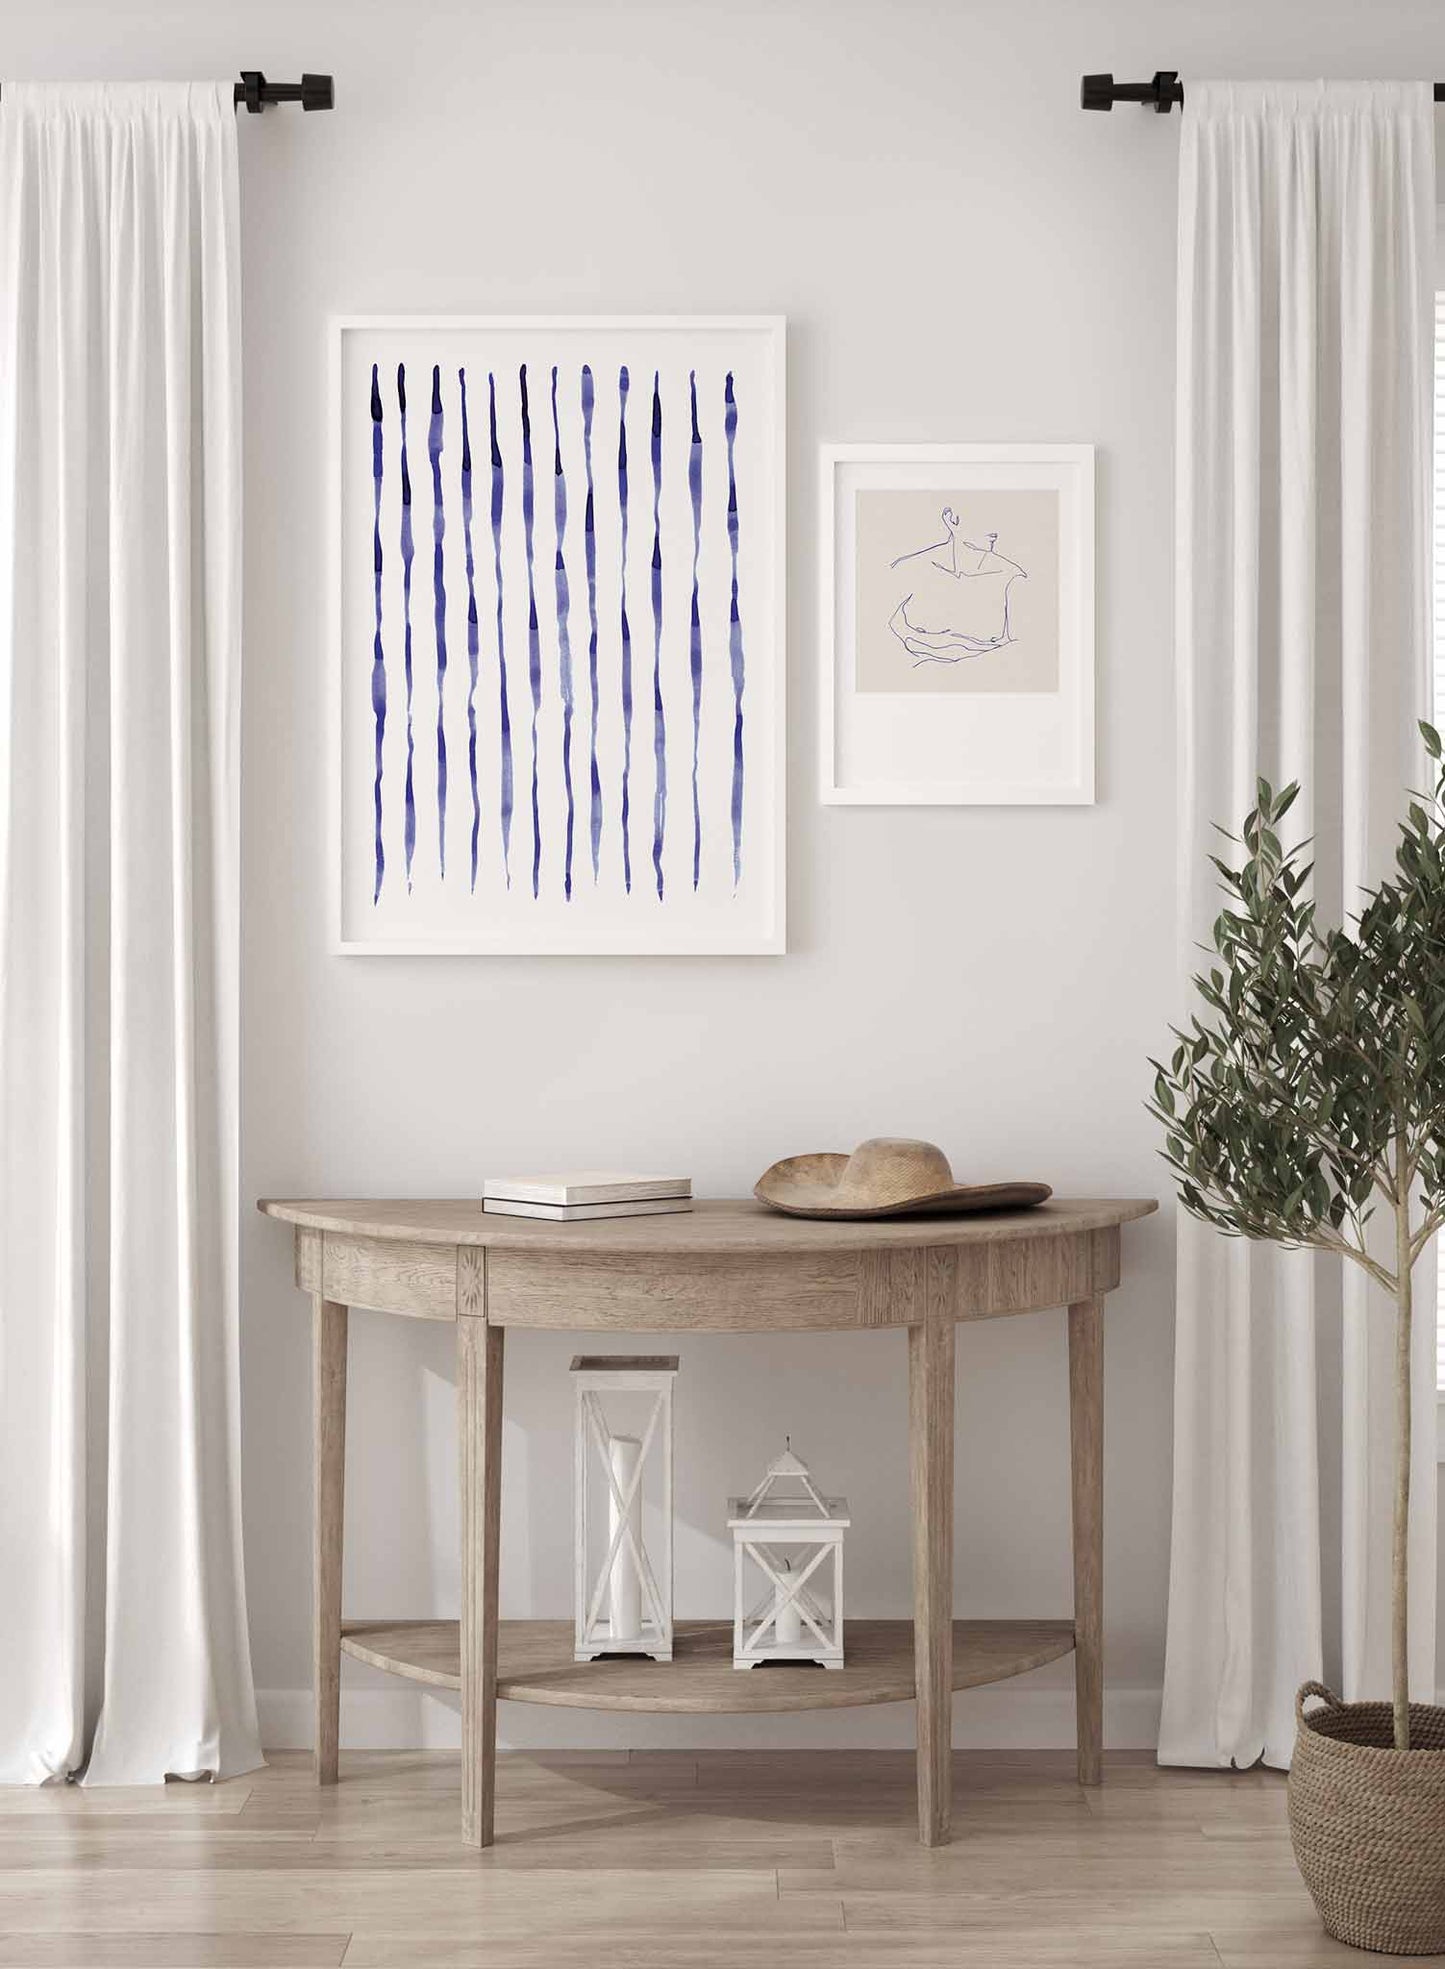 Nautical Stripes is a minimalist illustration of blue nautical stripes reminiscing the uniform of sailors by Opposite Wall.